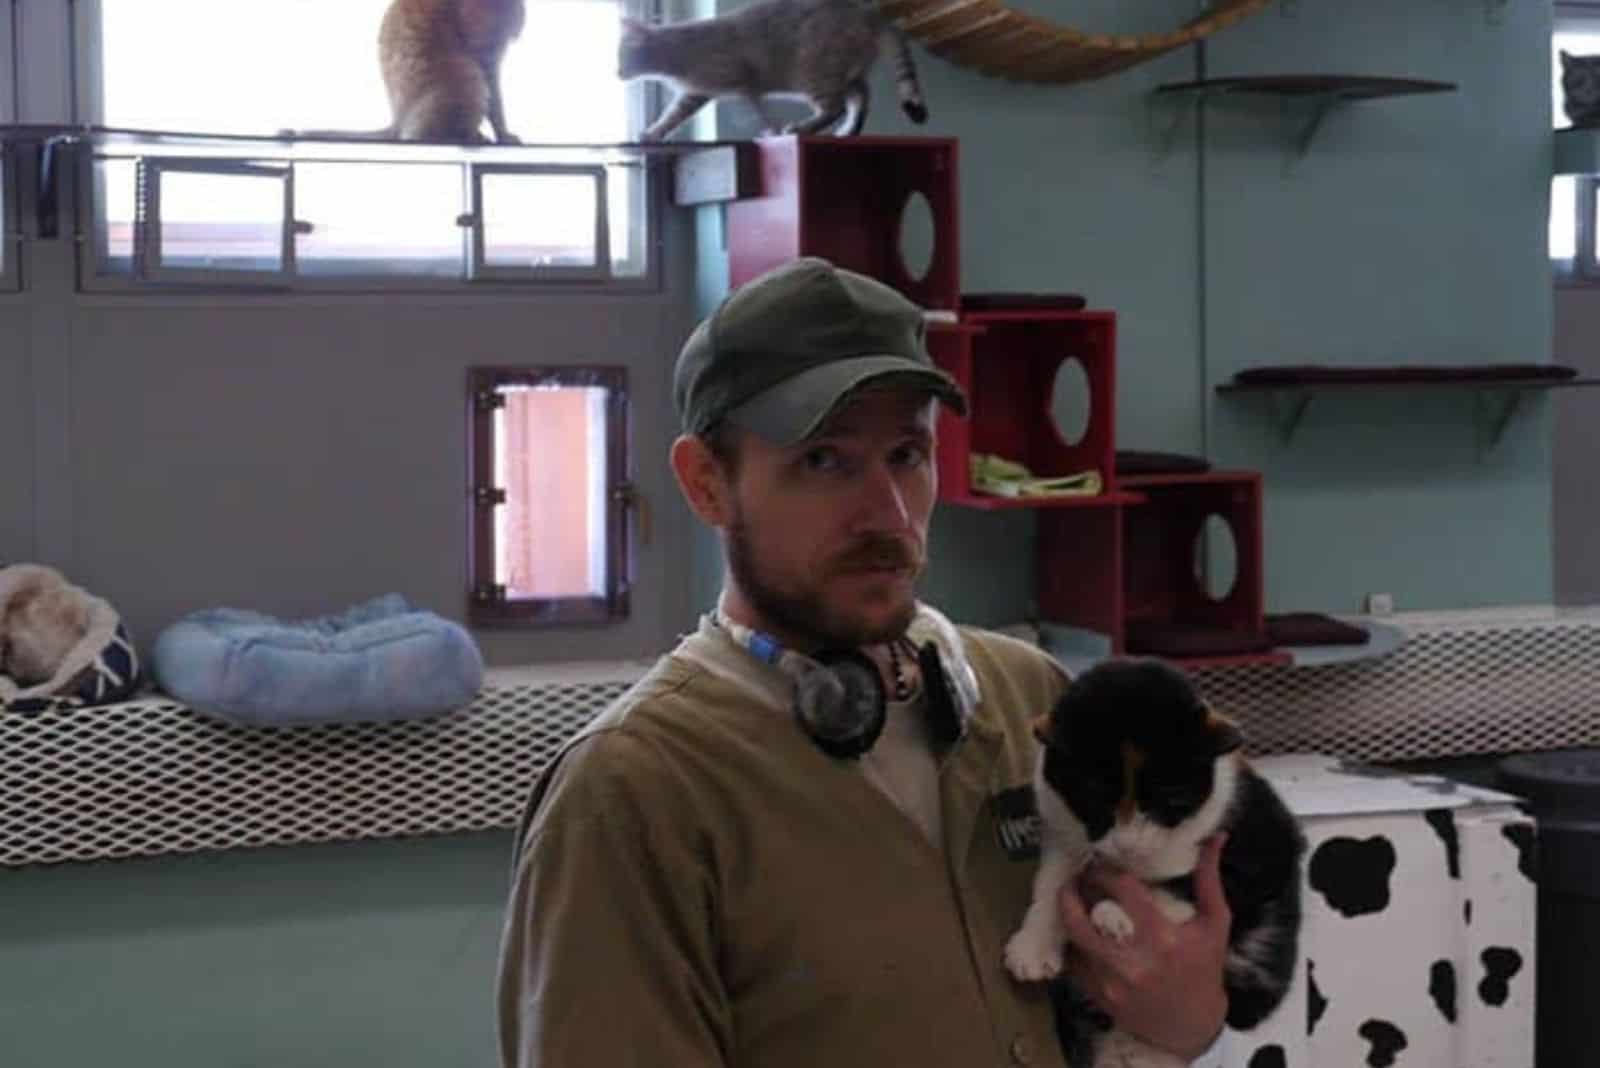 Guy holding a cat, while two cats trying to escape